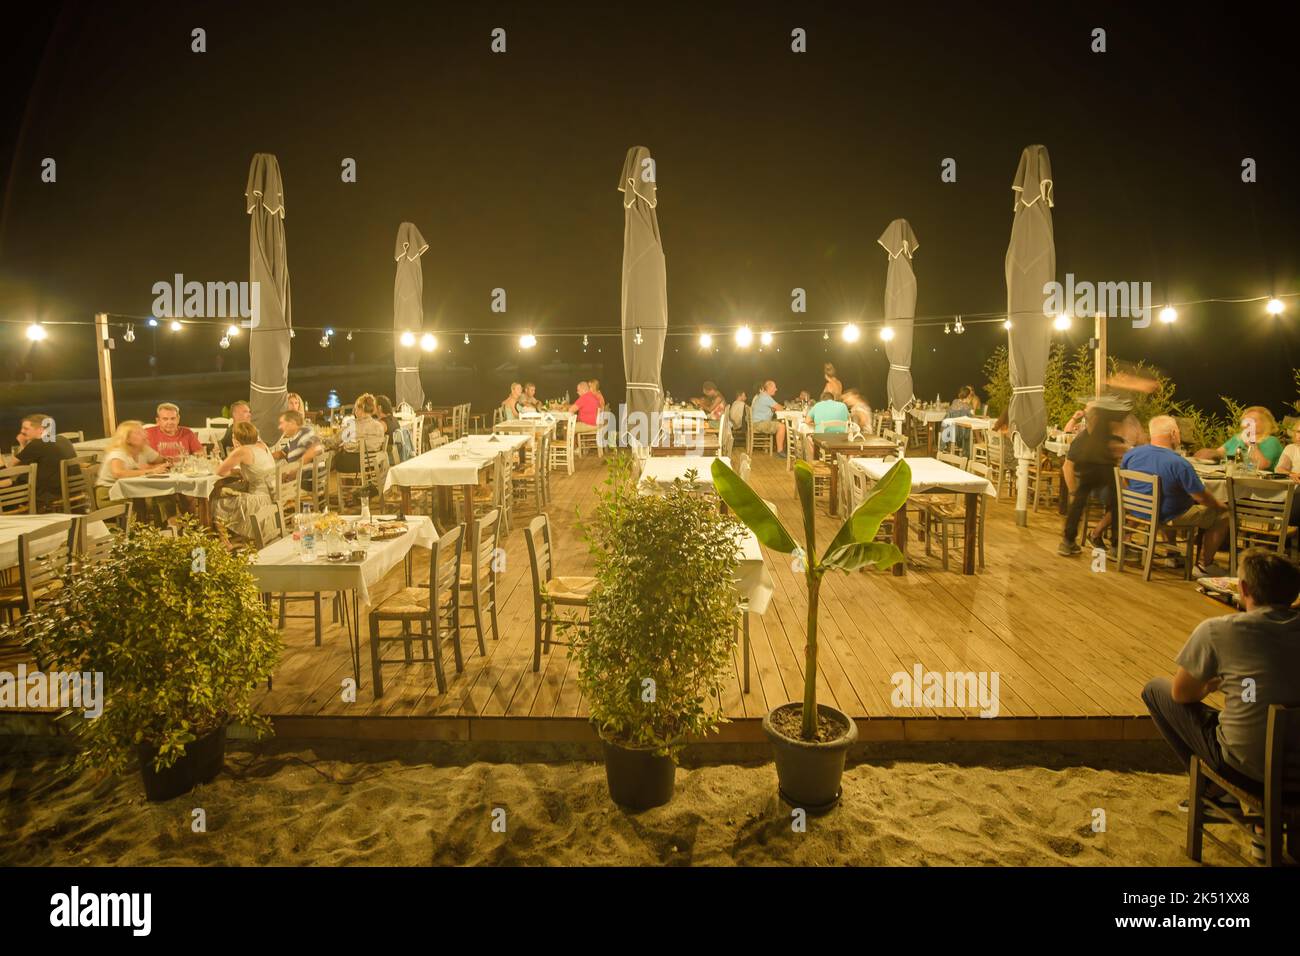 Nea Kallikrateia, Greece - August 31, 2022 : Greeks and tourists enjoying dinner outdoors at a cozy illuminated restaurant in front of the sea Stock Photo